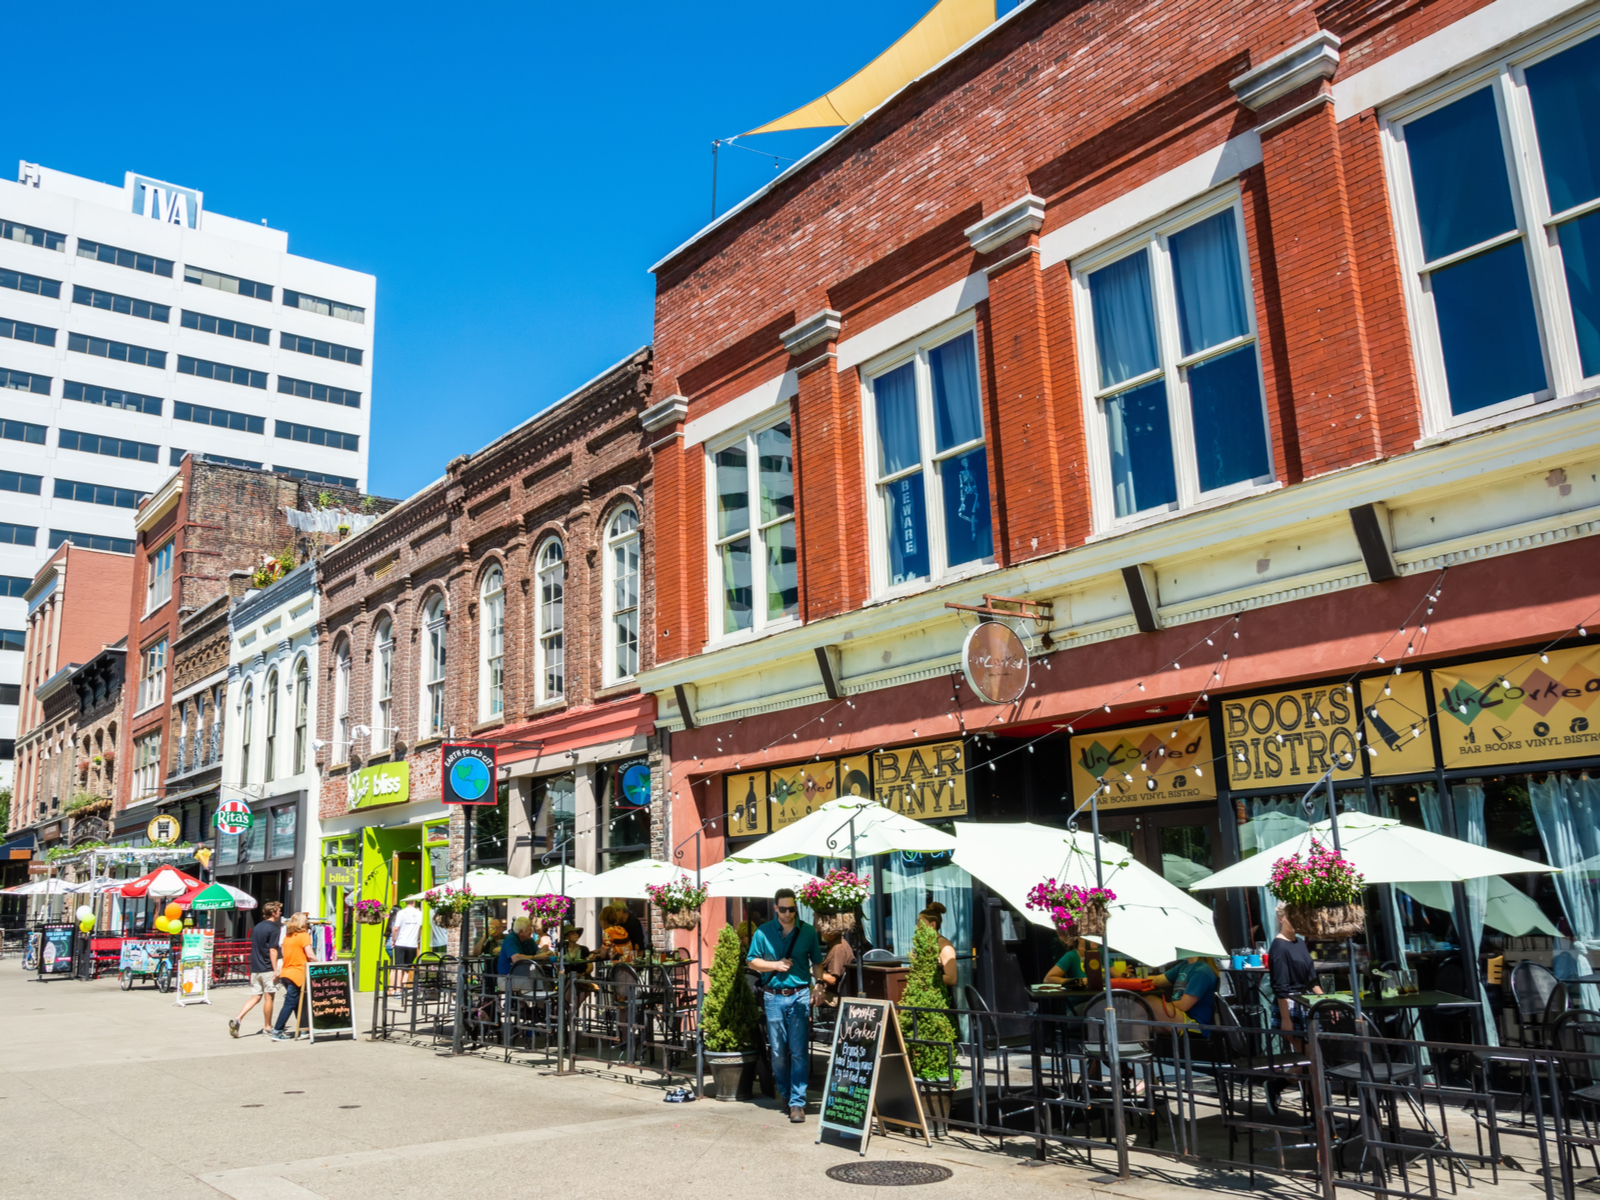 People enjoying lunch during a clear day at a series of restaurants in historic buildings and commercial properties on the Market Square, one of the best things to do in Tennessee